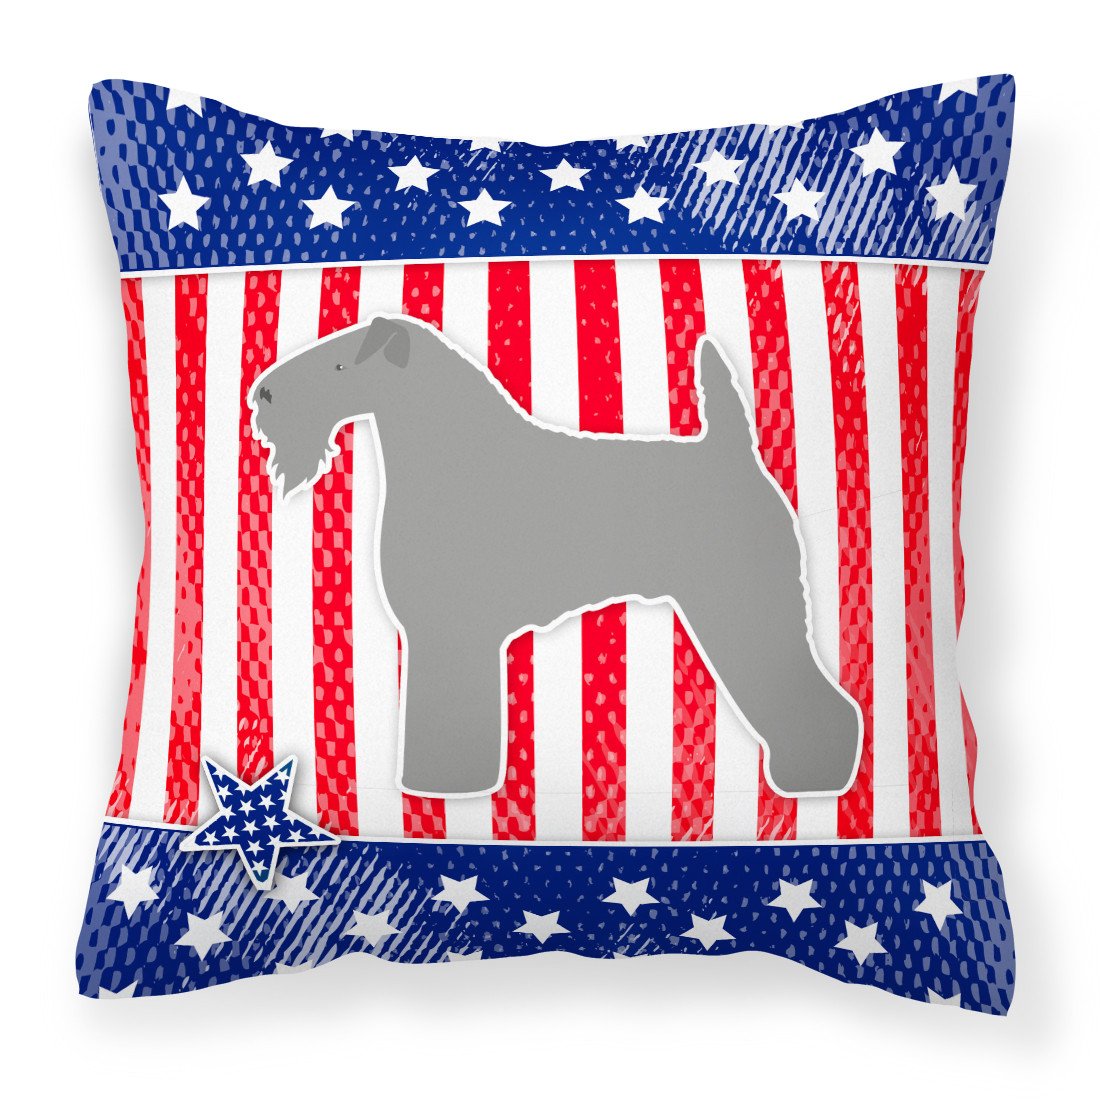 USA Patriotic Kerry Blue Terrier Fabric Decorative Pillow BB3292PW1818 by Caroline's Treasures